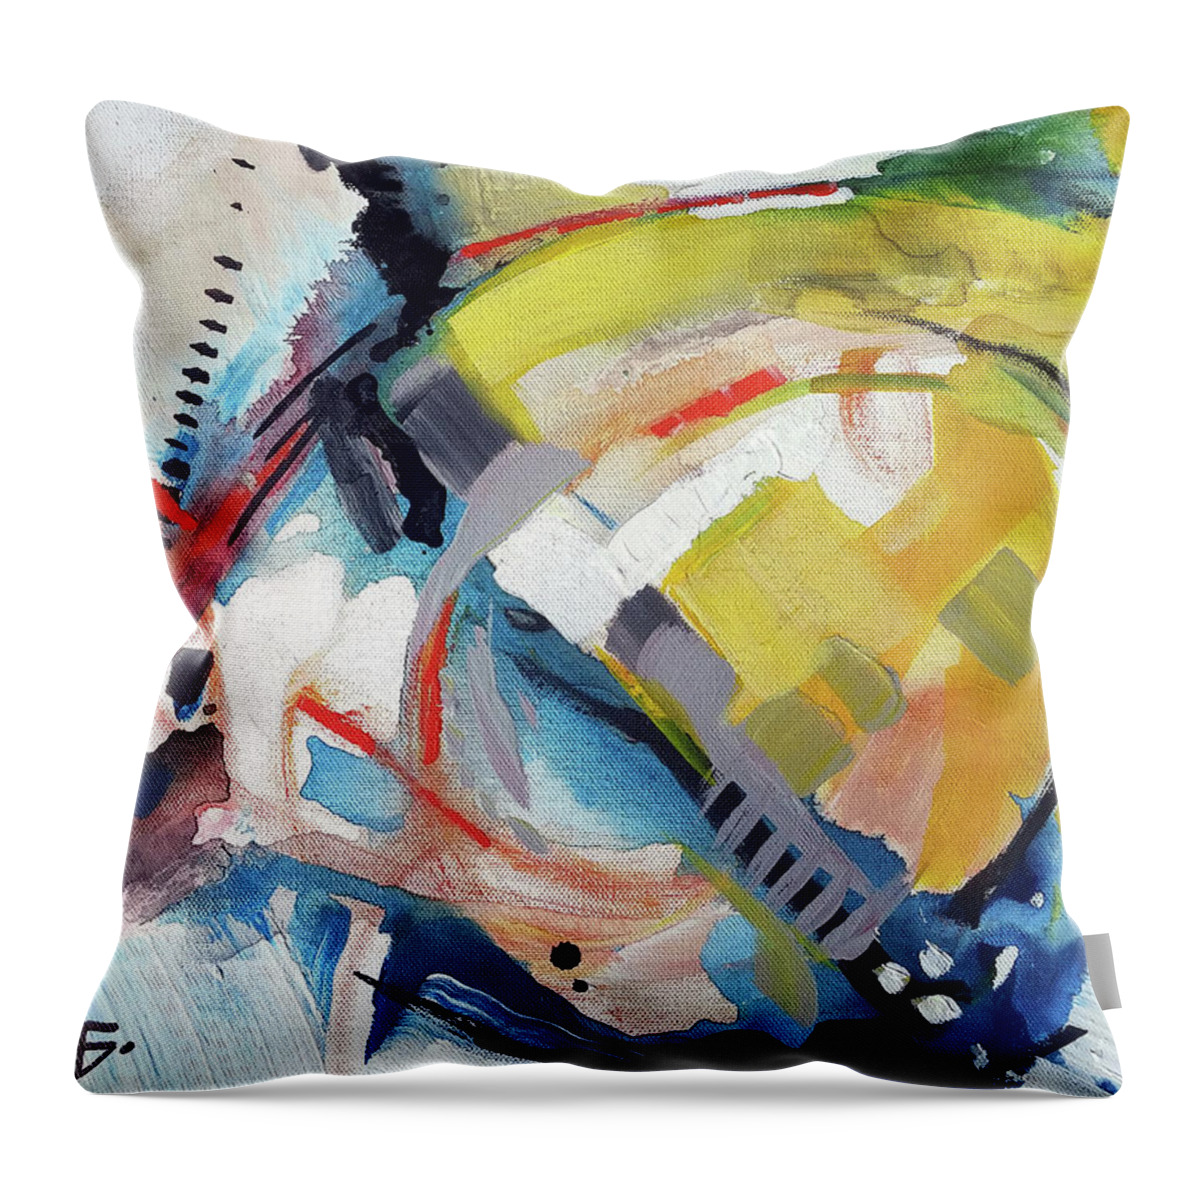  Throw Pillow featuring the painting Orange Juice Mix by John Gholson